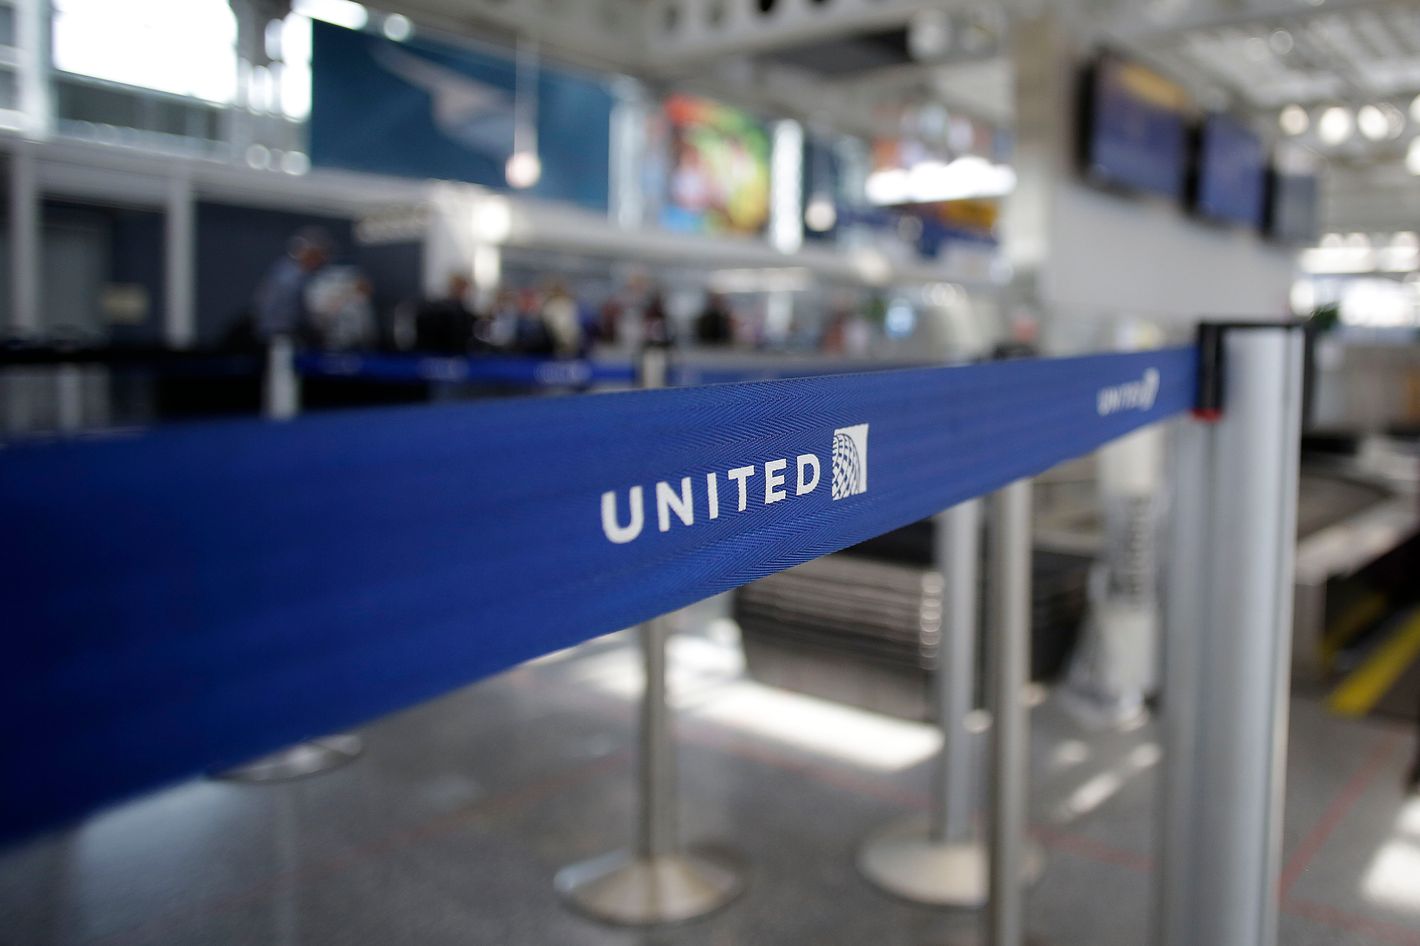 United Employees Can No Longer Displace Boarded Passengers